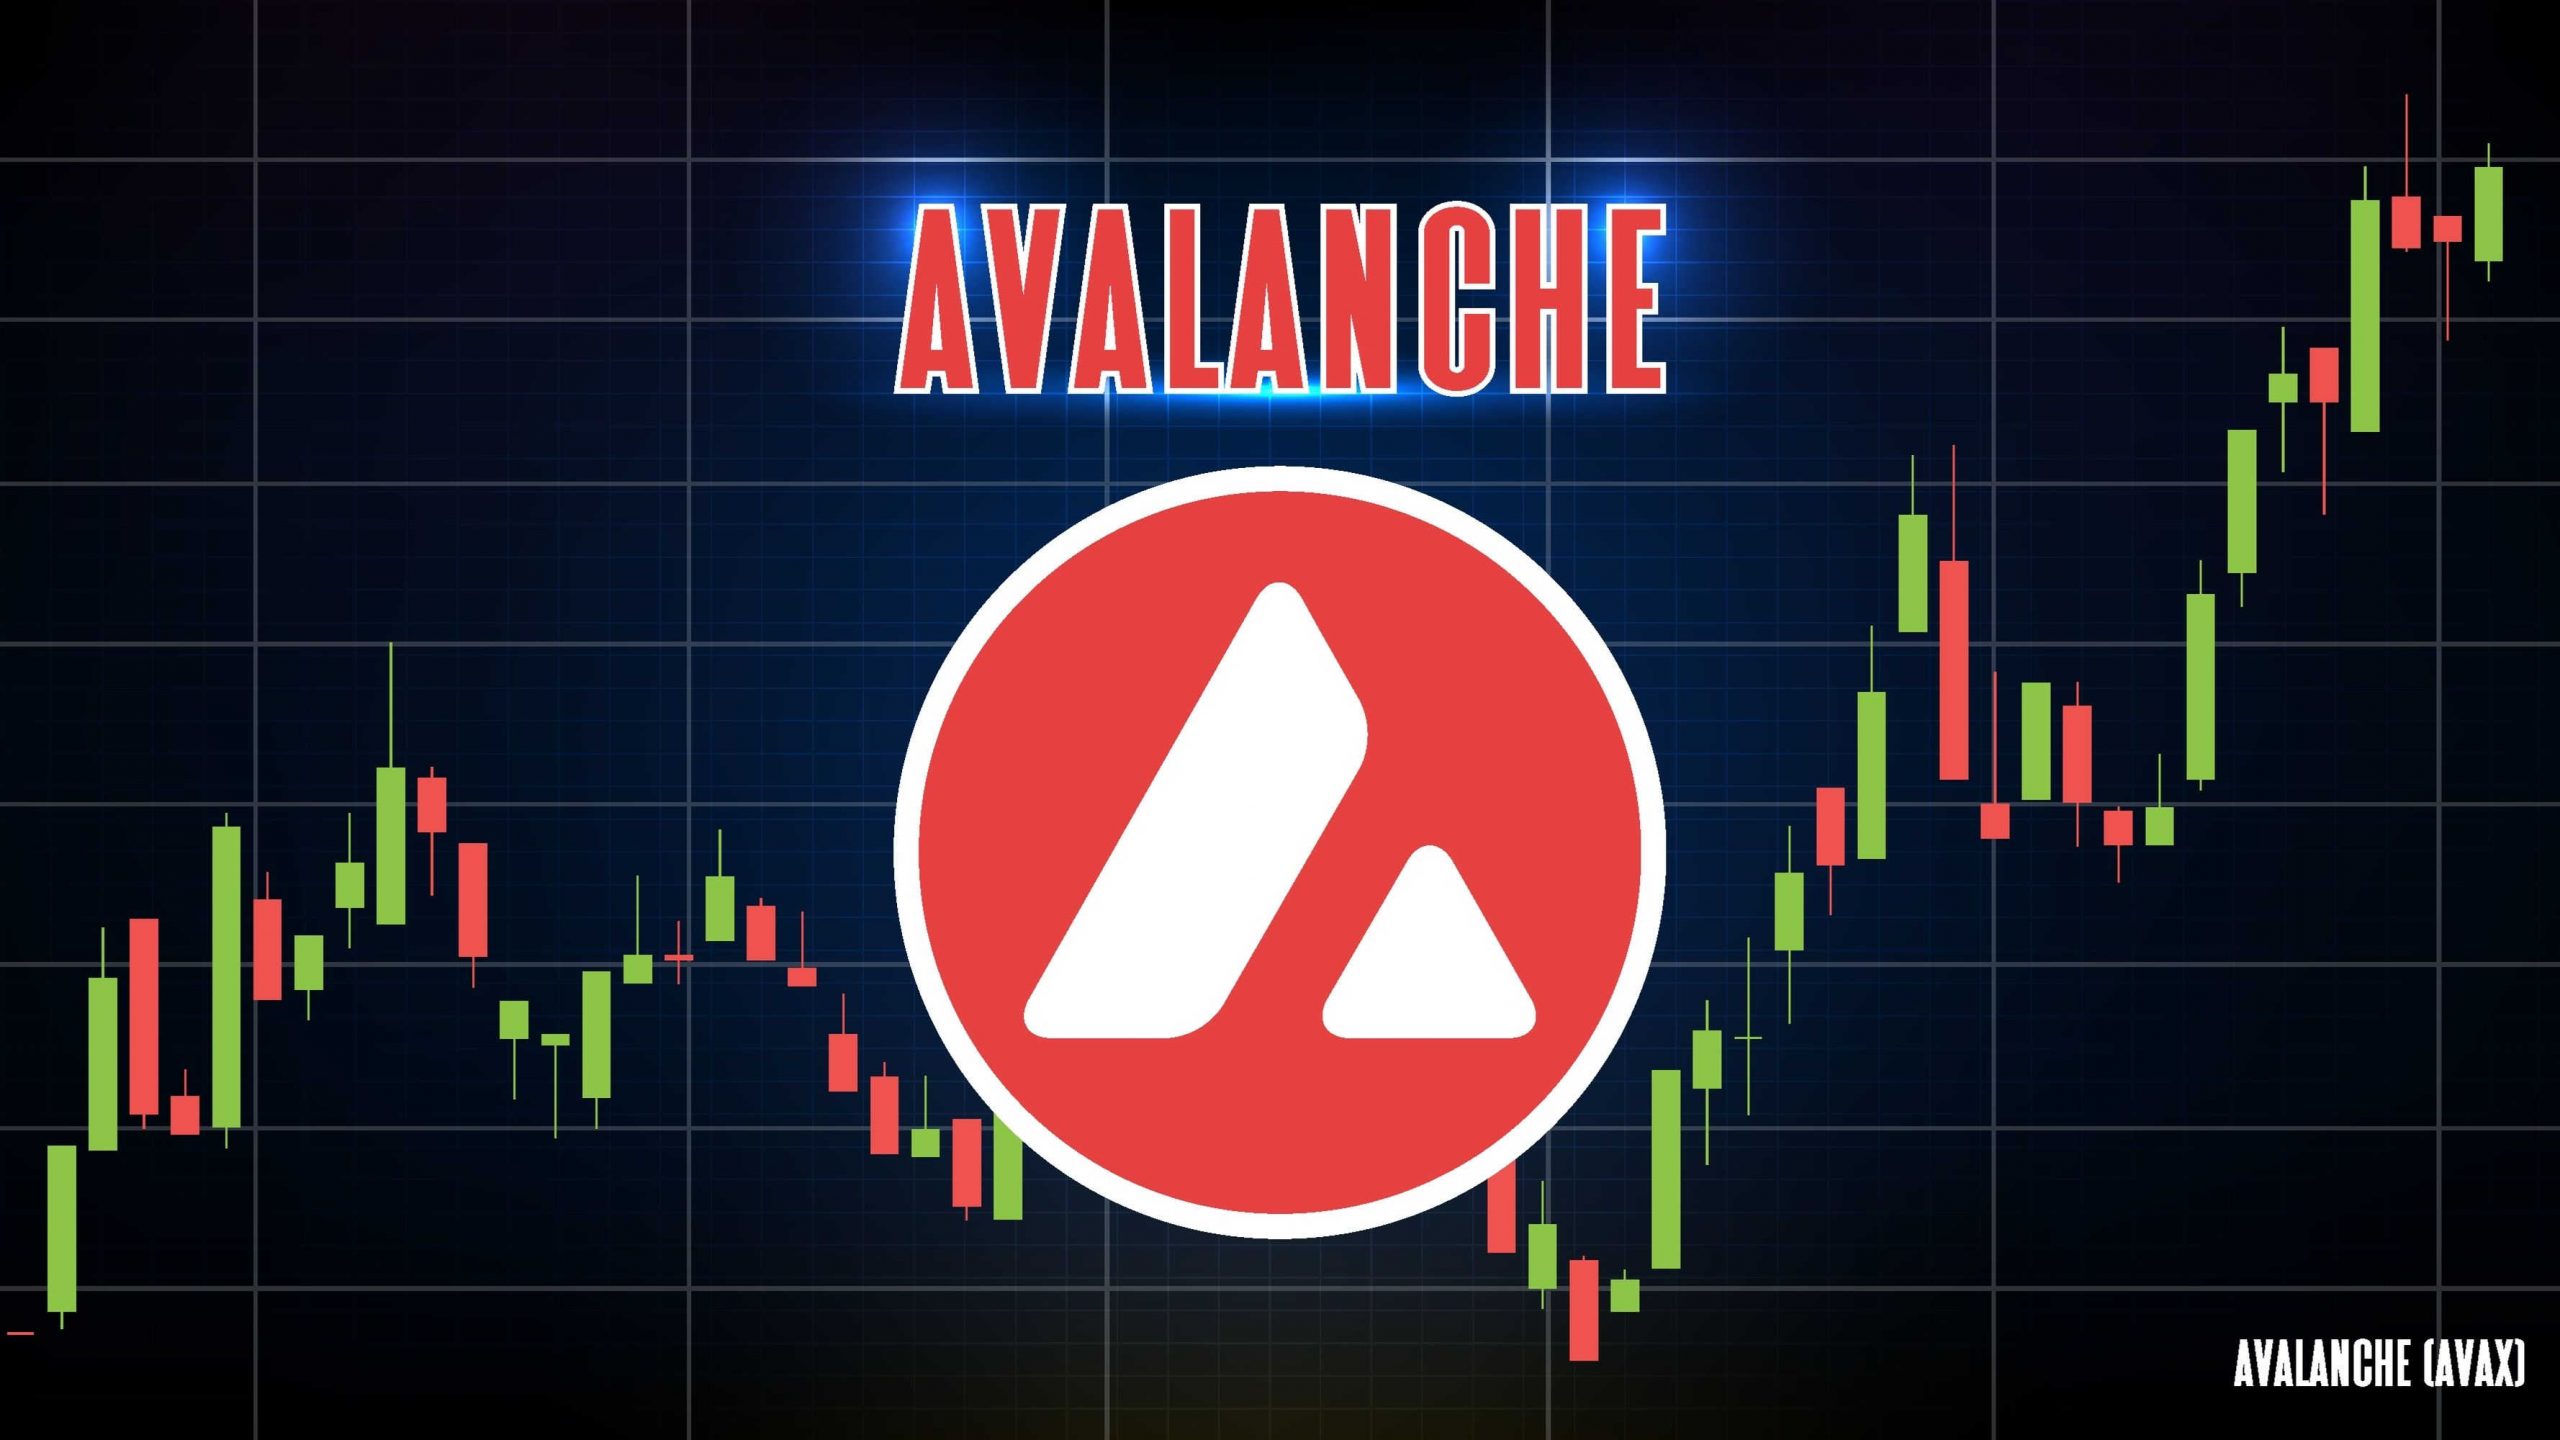 AVAX rallies by more than 13% as the broader market recovers